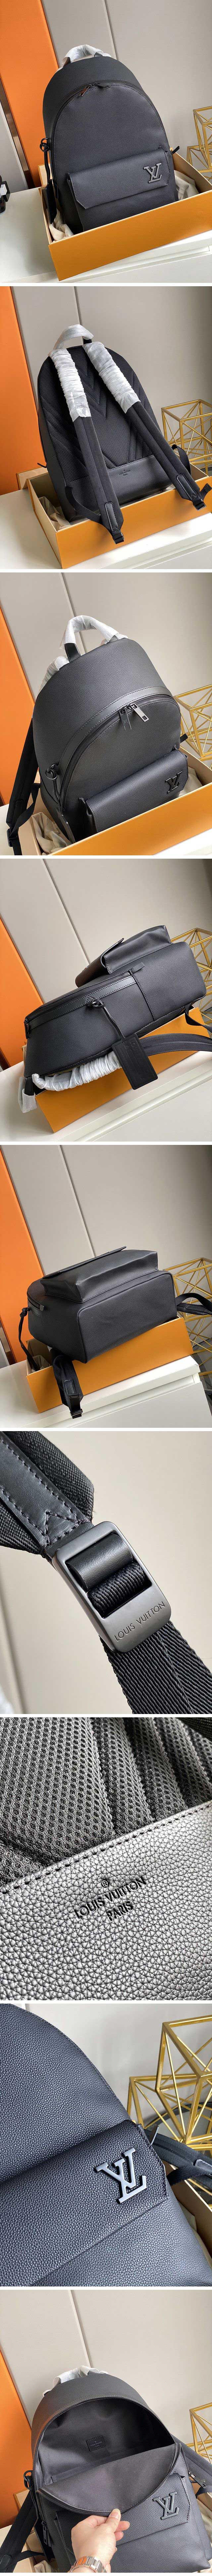 Louis Vuitton Takeoff Backpack ルイヴィトン M57079 テイクオフ バックパック